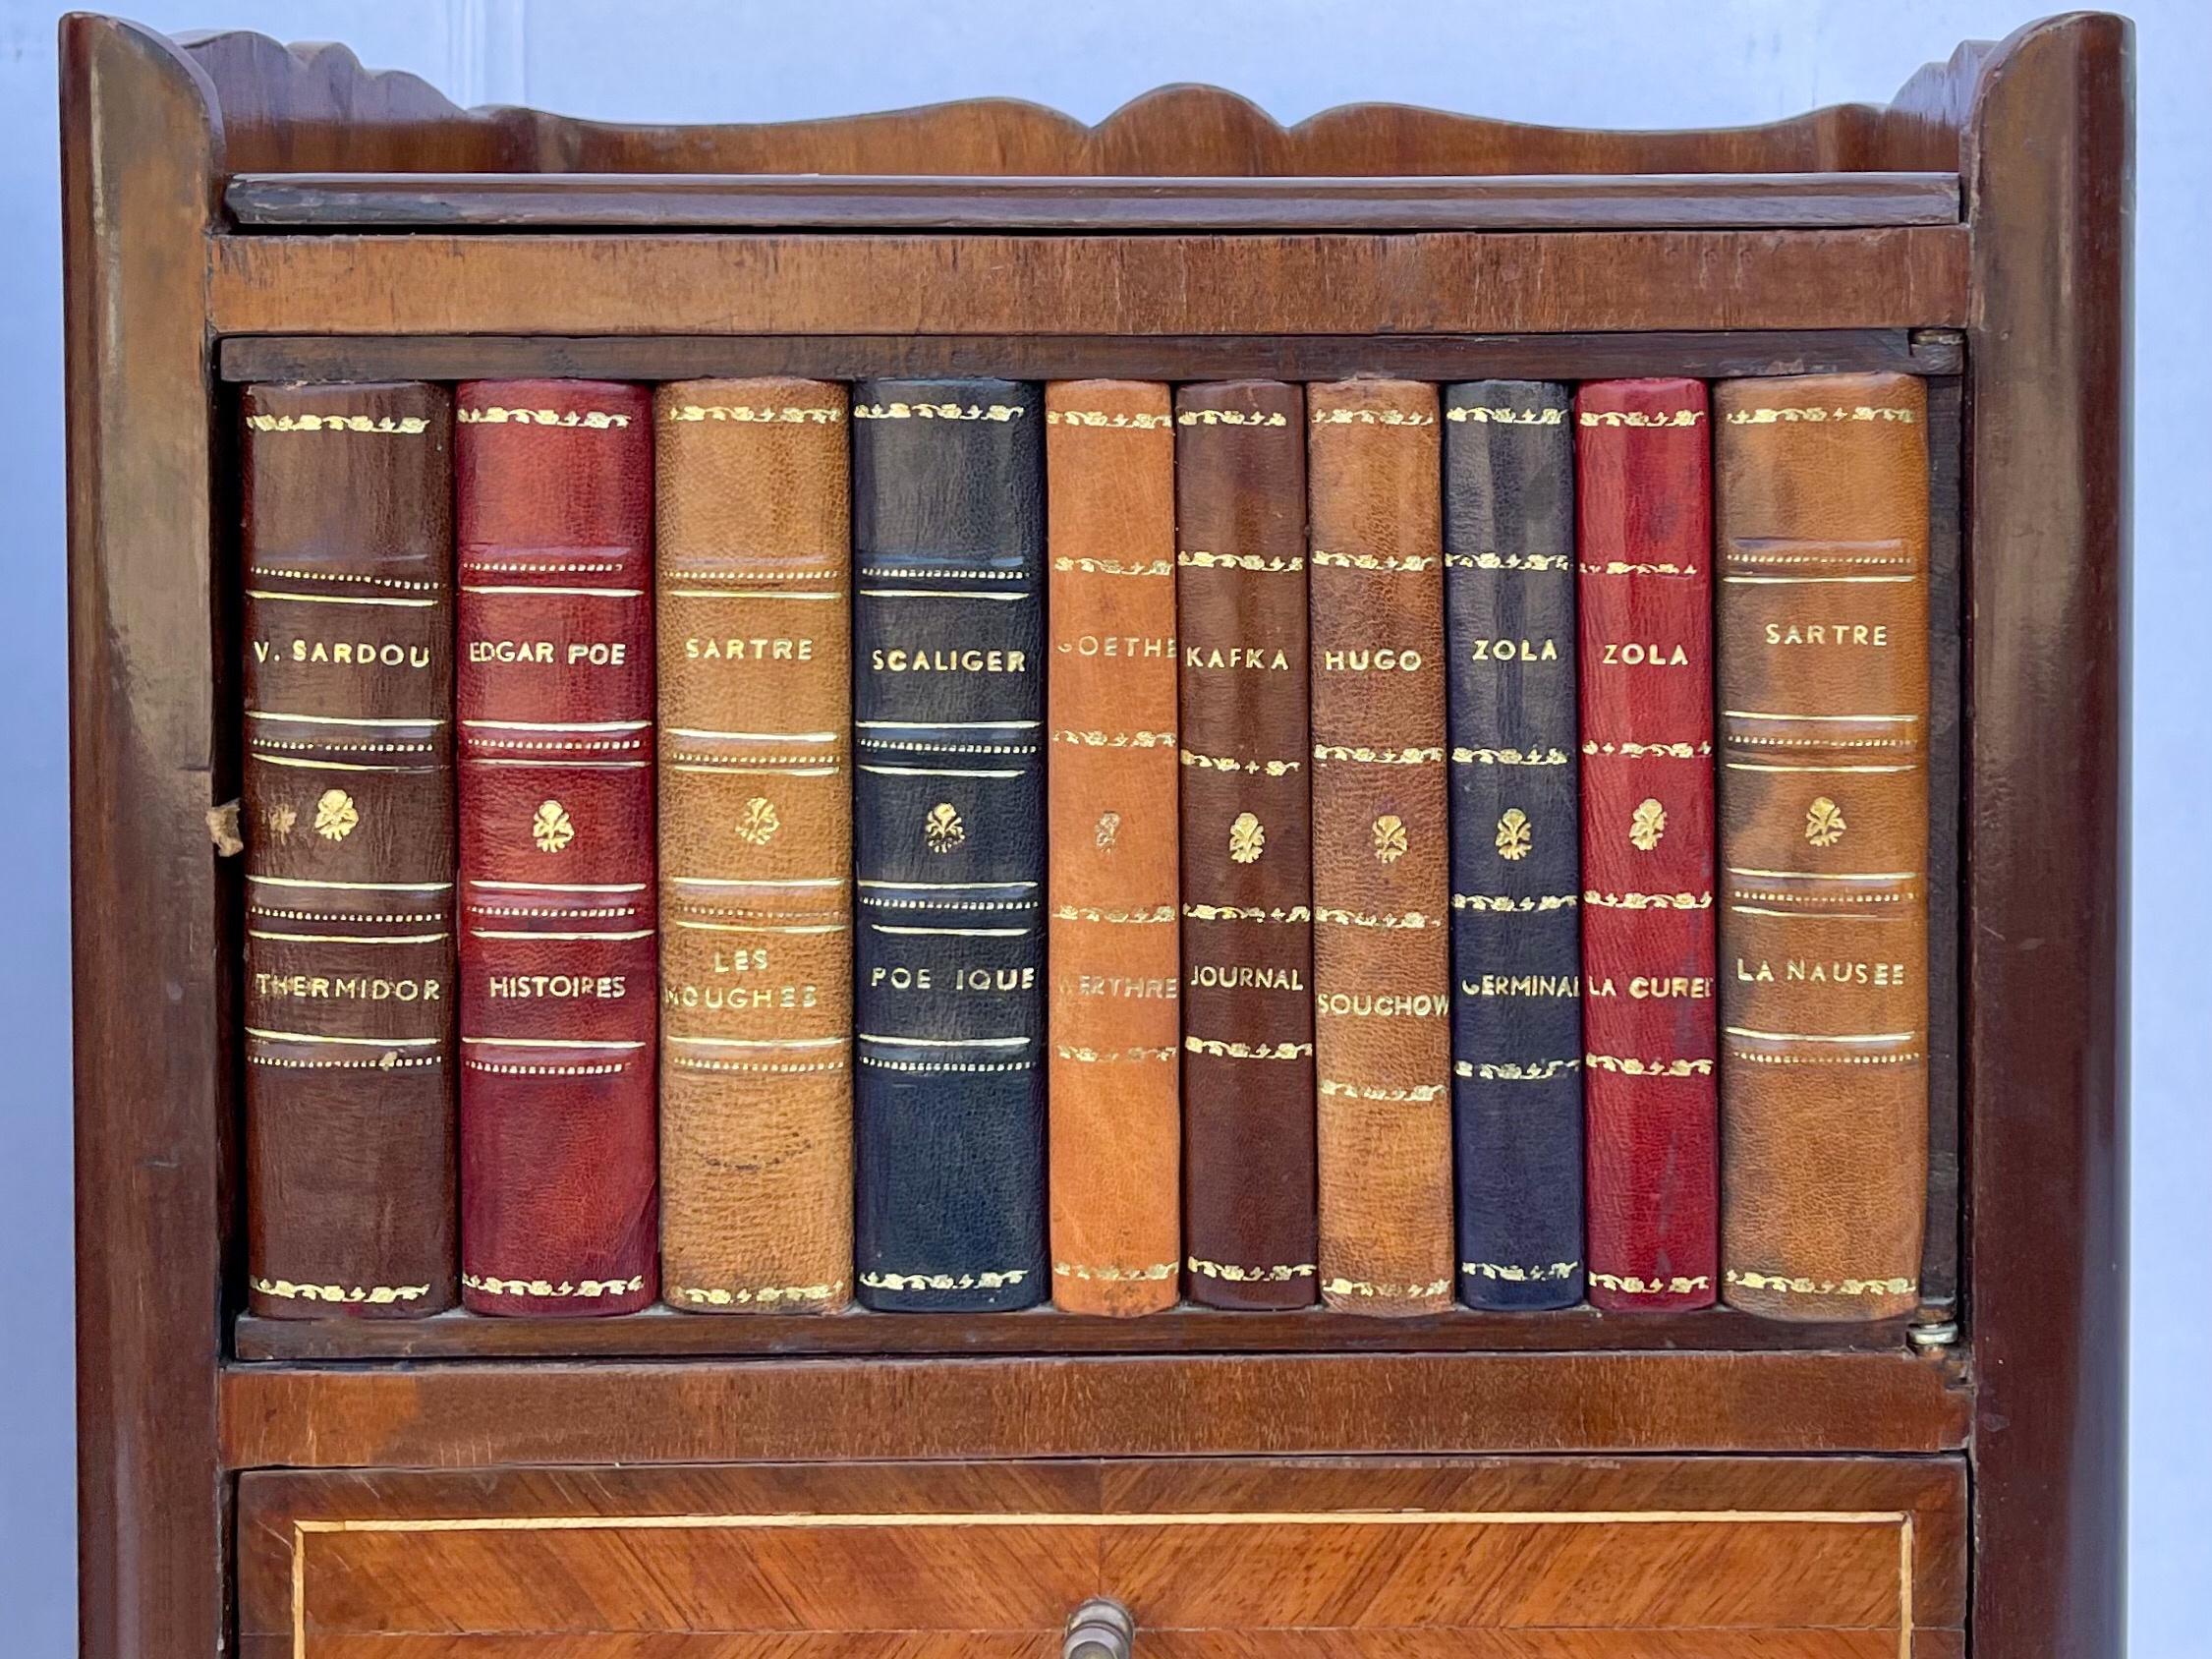 This is a pair of mahogany and satinwood inlaid faux book tables with French styling. The embossed leather book bindings depict the classics and open to hidden storage. They are unmarked and in very good condition.